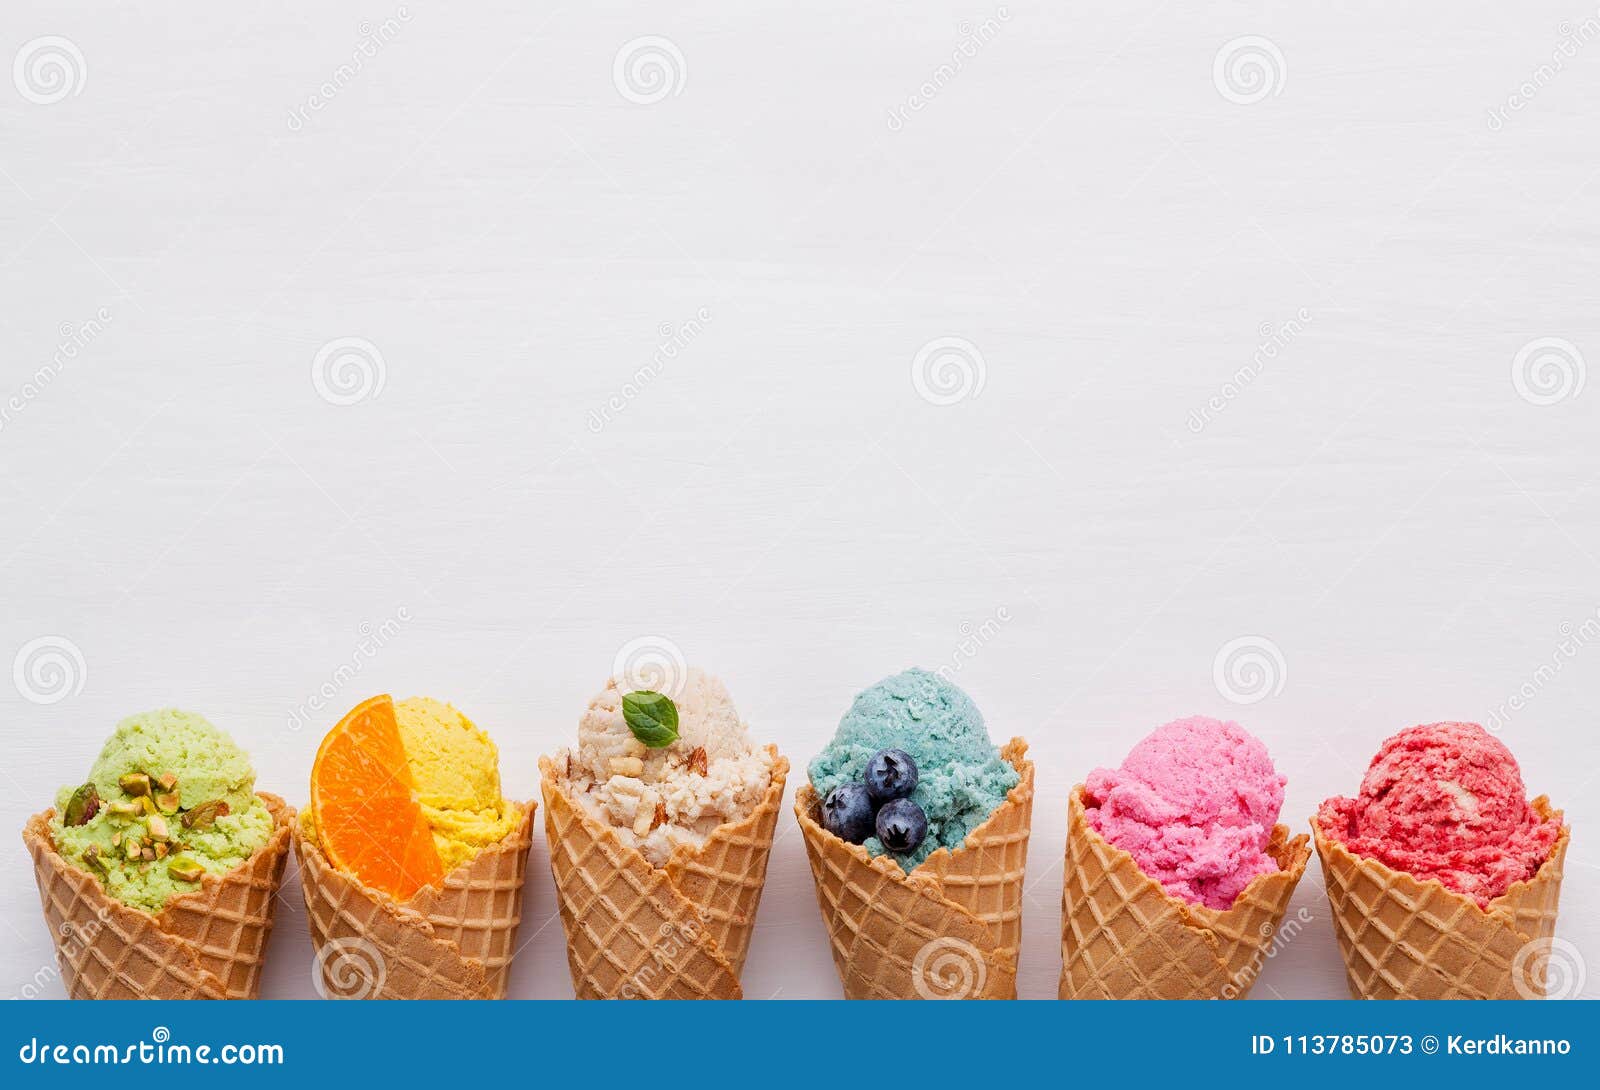 various of ice cream flavor in cones blueberry ,strawberry ,pistachio ,almond ,orange and cherry setup on white wooden background